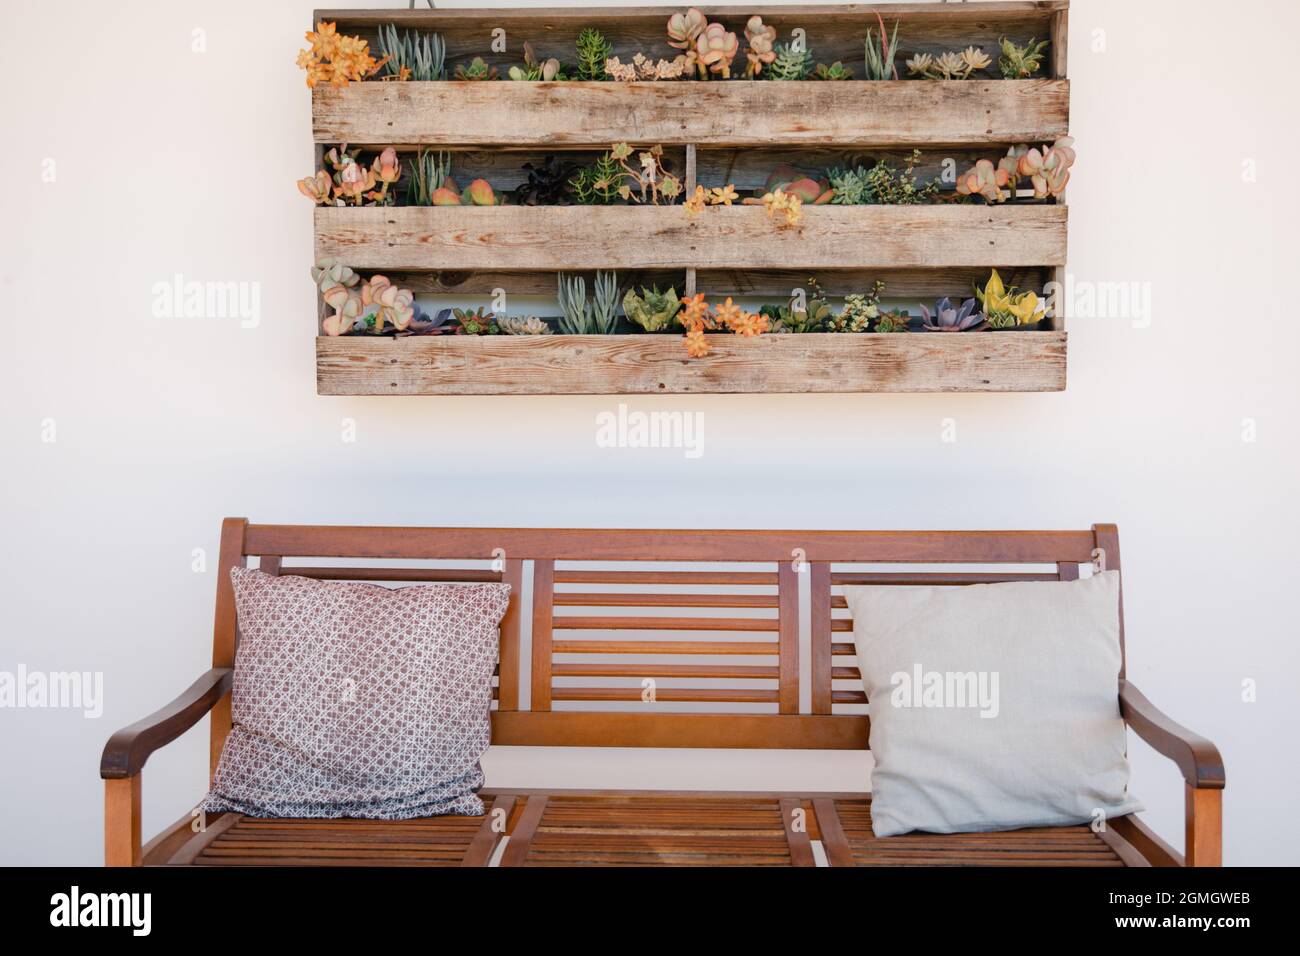 Vertical wooden planters with succulents on white wall with backyard bench and pillows Stock Photo